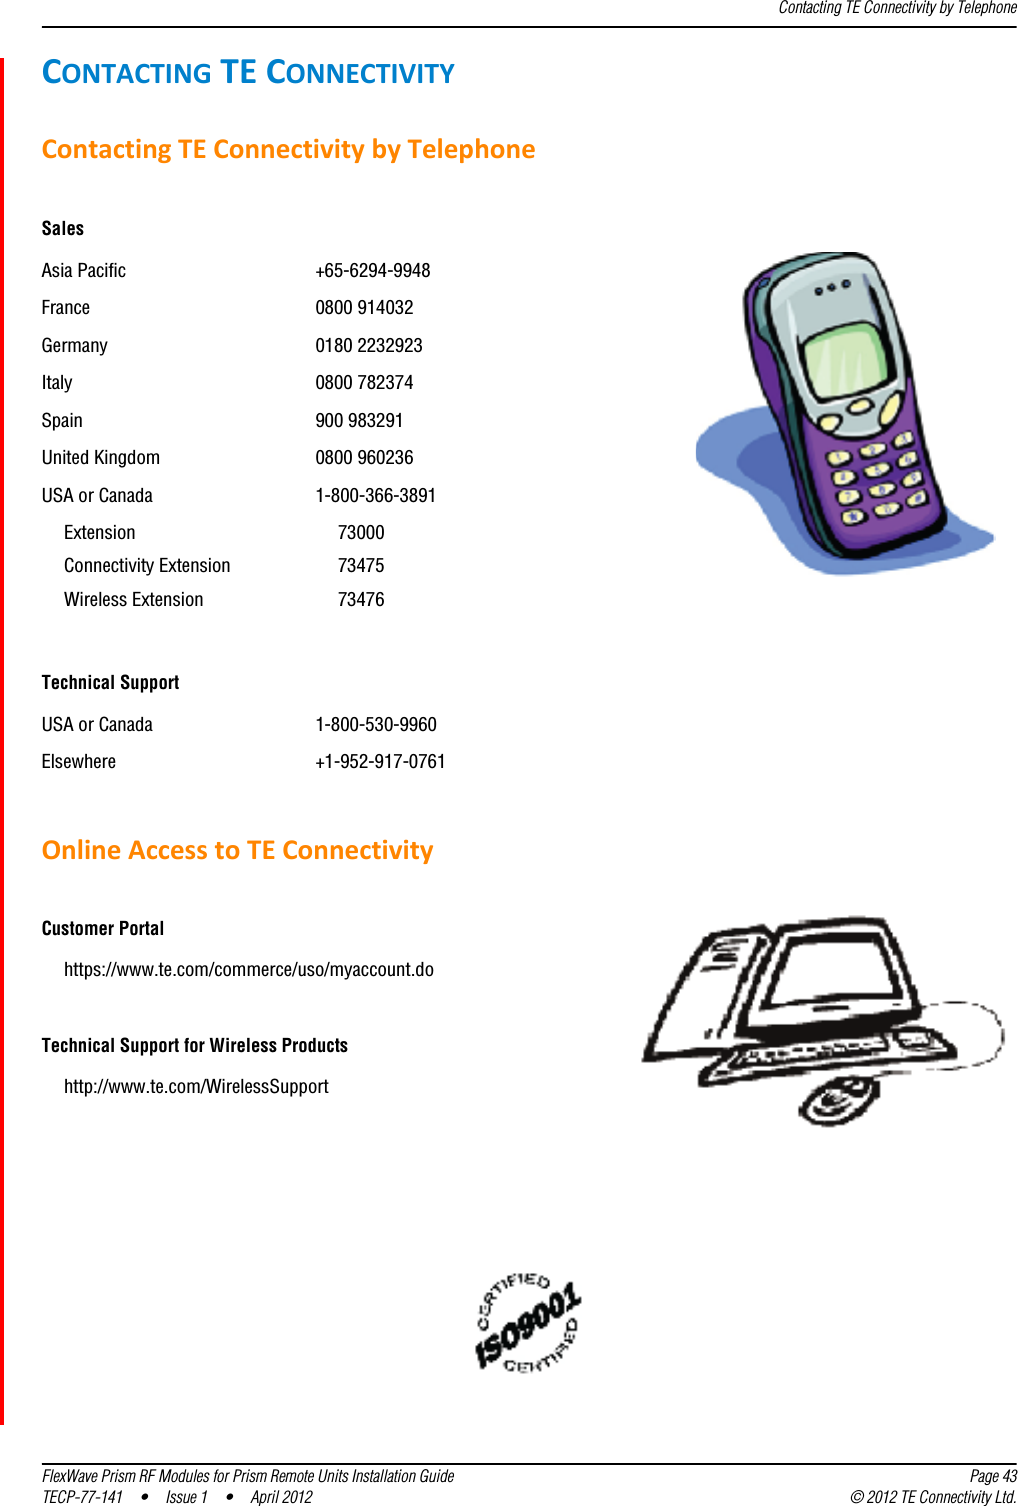 Contacting TE Connectivity by TelephoneFlexWave Prism RF Modules for Prism Remote Units Installation Guide Page 43TECP-77-141 • Issue 1 • April 2012 © 2012 TE Connectivity Ltd.CONTACTINGTECONNECTIVITYContactingTEConnectivitybyTelephoneSalesAsia Pacific +65-6294-9948France 0800 914032Germany 0180 2232923Italy 0800 782374Spain 900 983291United Kingdom 0800 960236USA or Canada 1-800-366-3891Extension 73000Connectivity Extension 73475Wireless Extension 73476Technical SupportUSA or Canada 1-800-530-9960Elsewhere +1-952-917-0761OnlineAccesstoTEConnectivityCustomer Portalhttps://www.te.com/commerce/uso/myaccount.doTechnical Support for Wireless Productshttp://www.te.com/WirelessSupport 